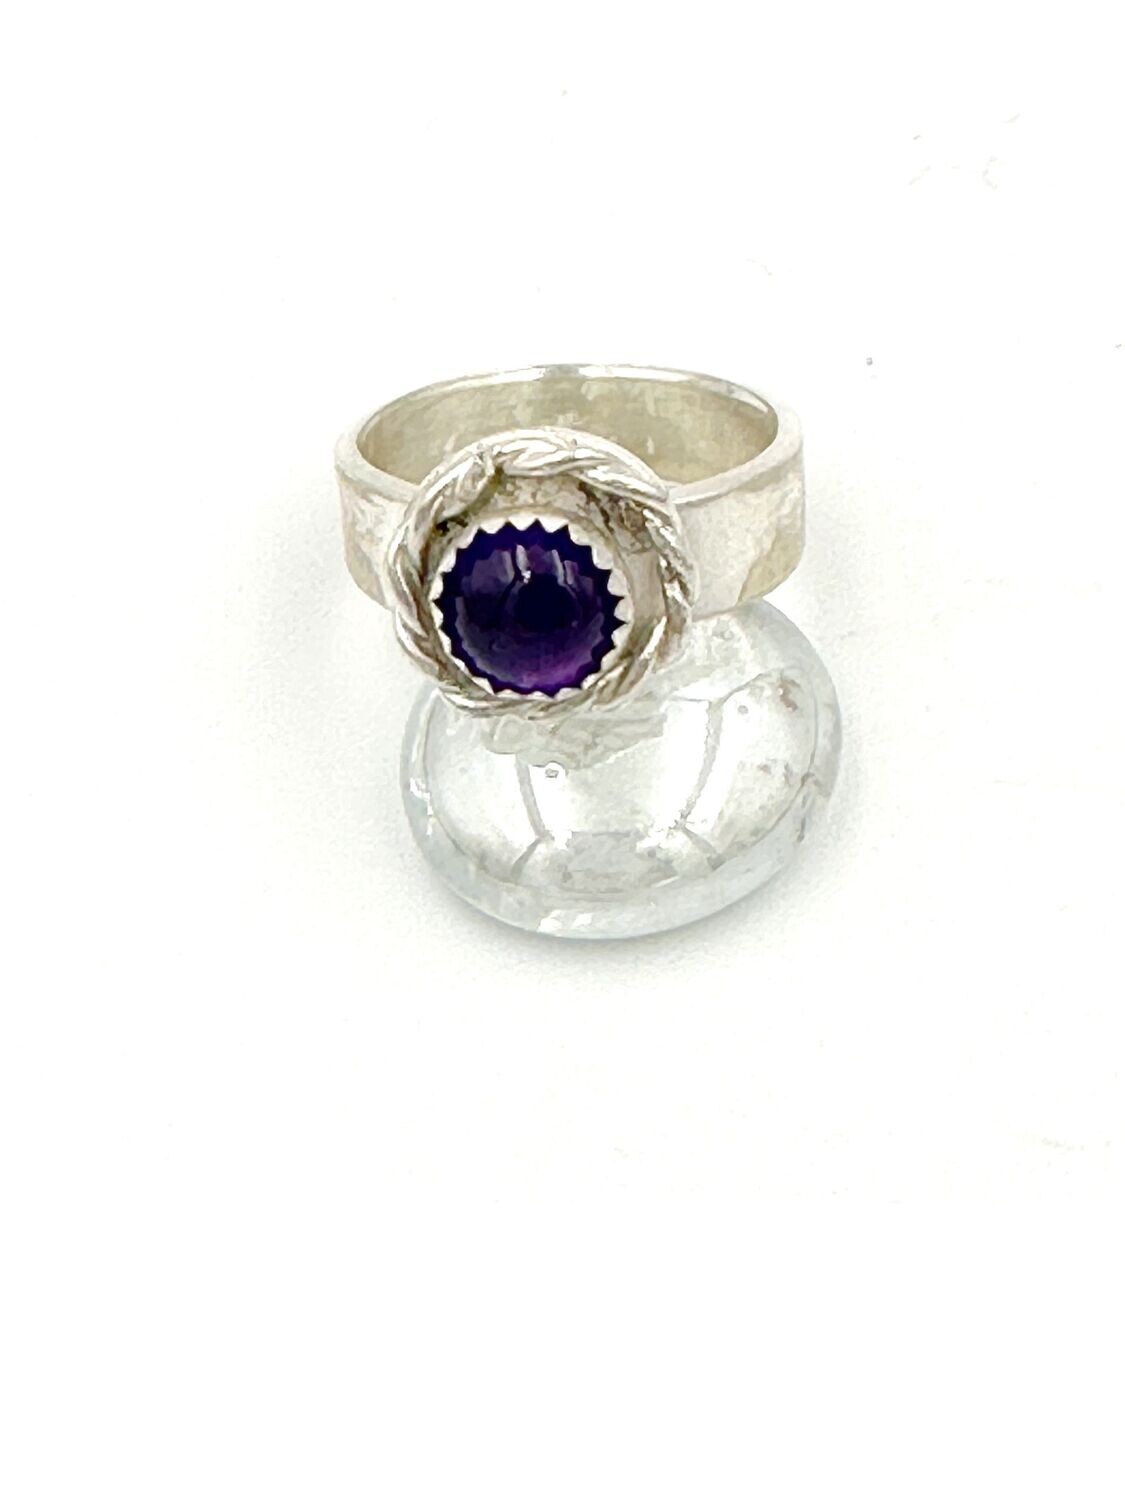 Amethyst wide ring with twist detail